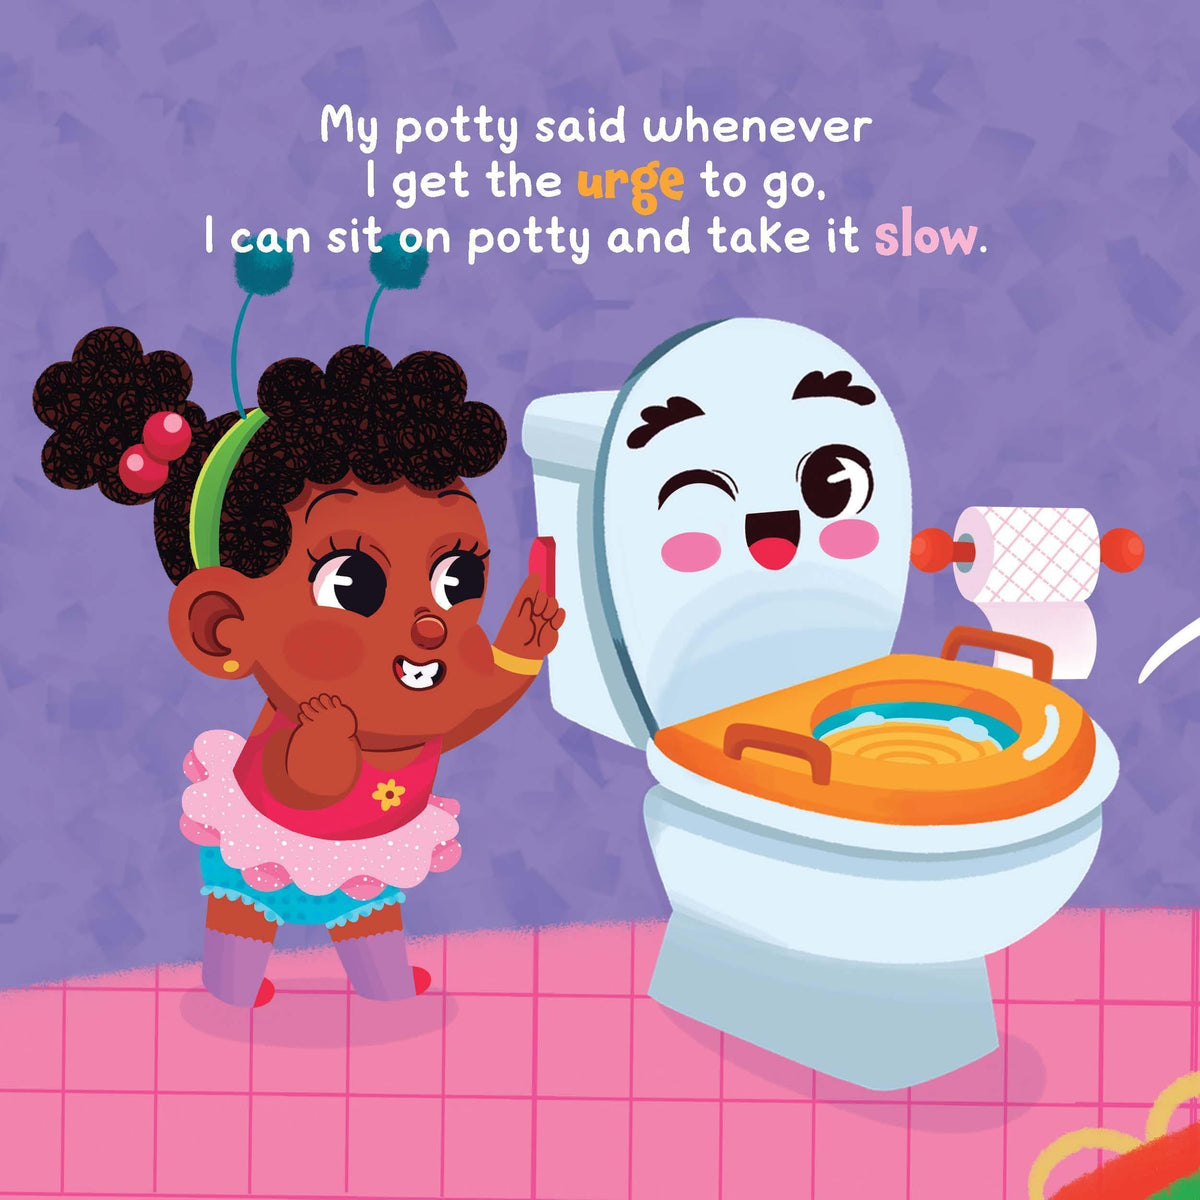 Potty Wants Pee - Author Krystaelynne Sanders Diggs [Body Safety]